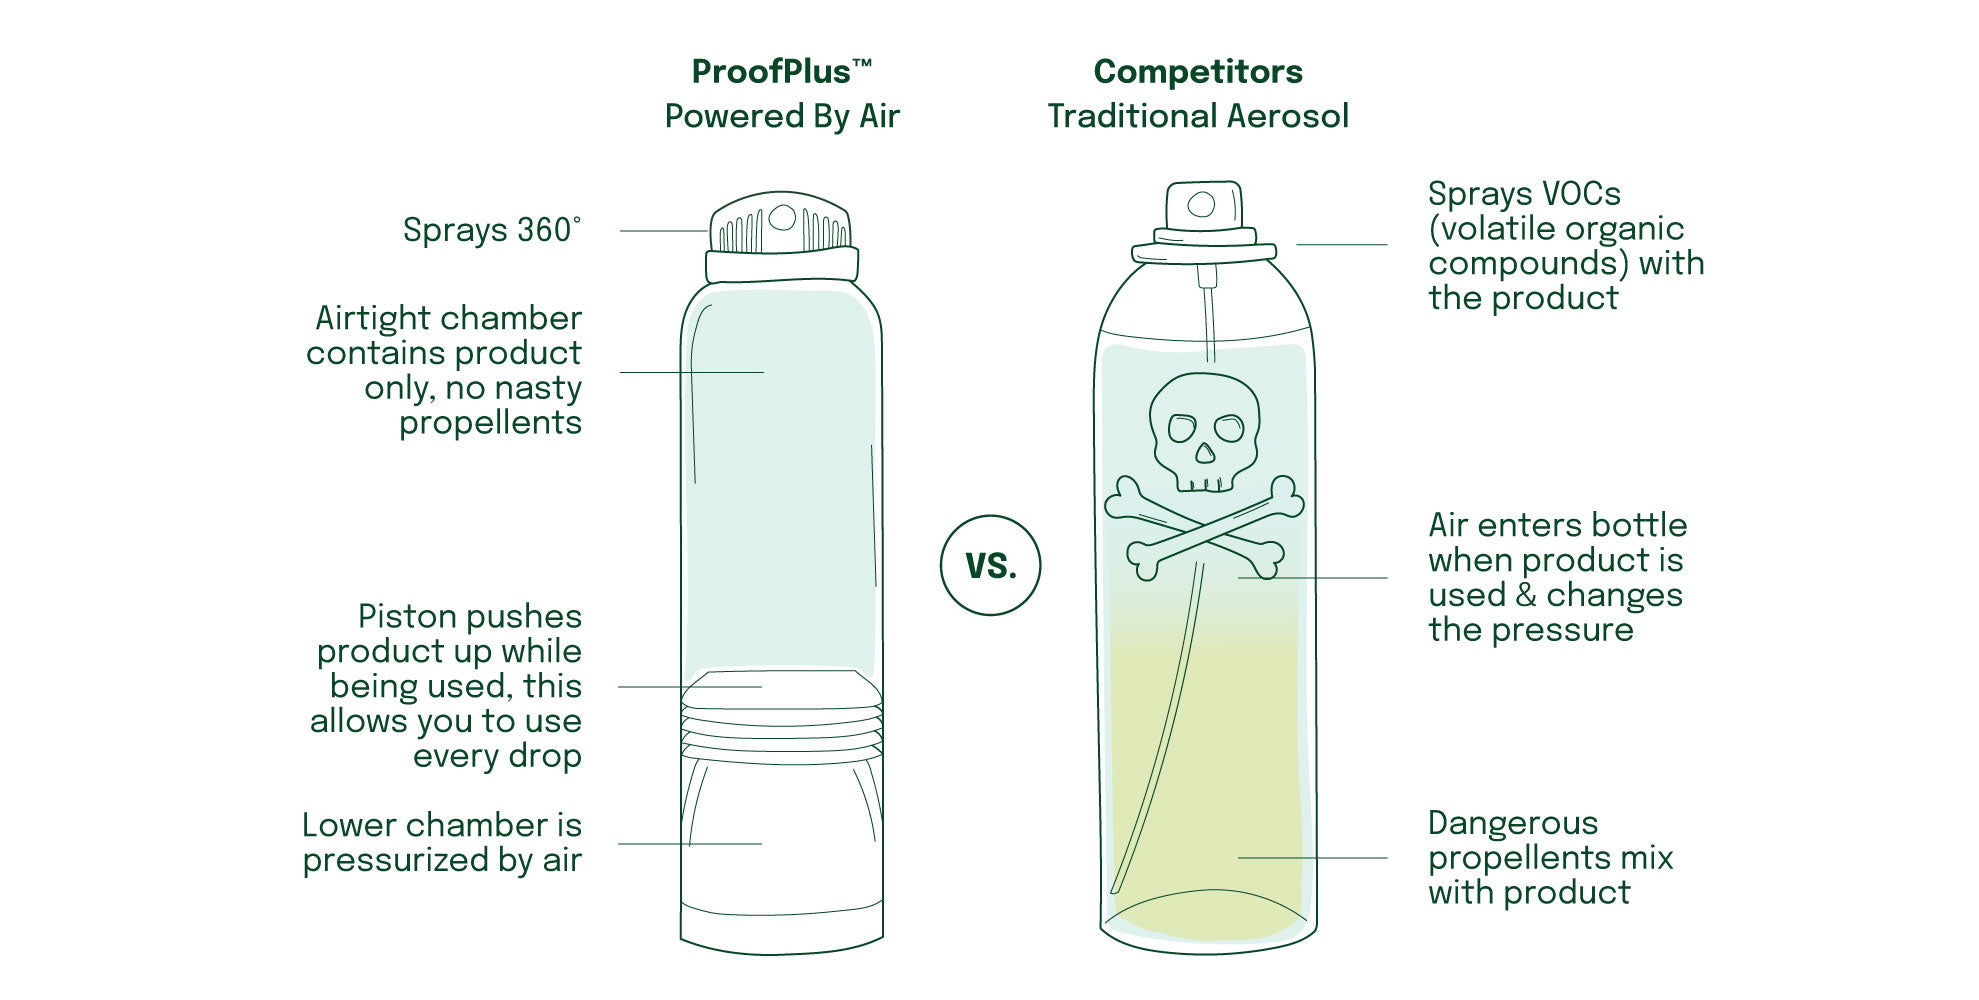 powered by air packaging compared to traditional aerosol packaging